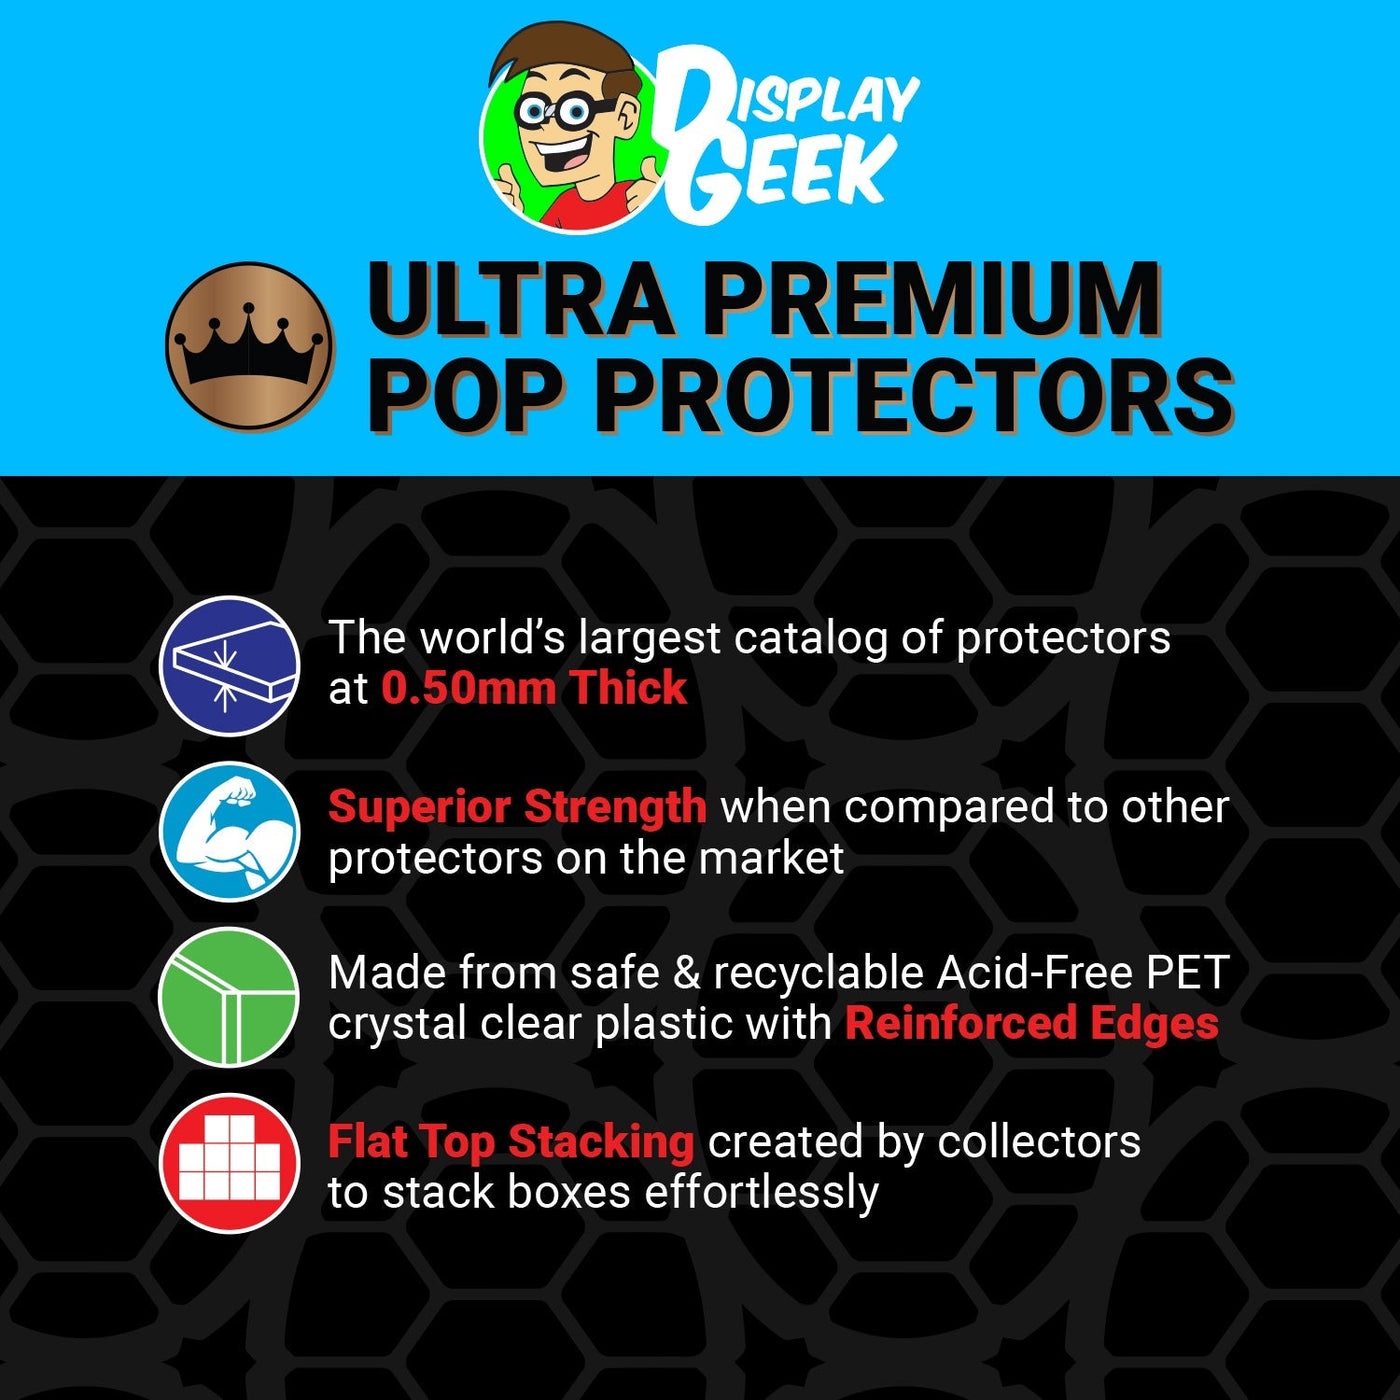 Pop Protector for 9 inch Giant Freddy Funko as Buzz Metallic SDCC Funko Pop on The Protector Guide App by Display Geek